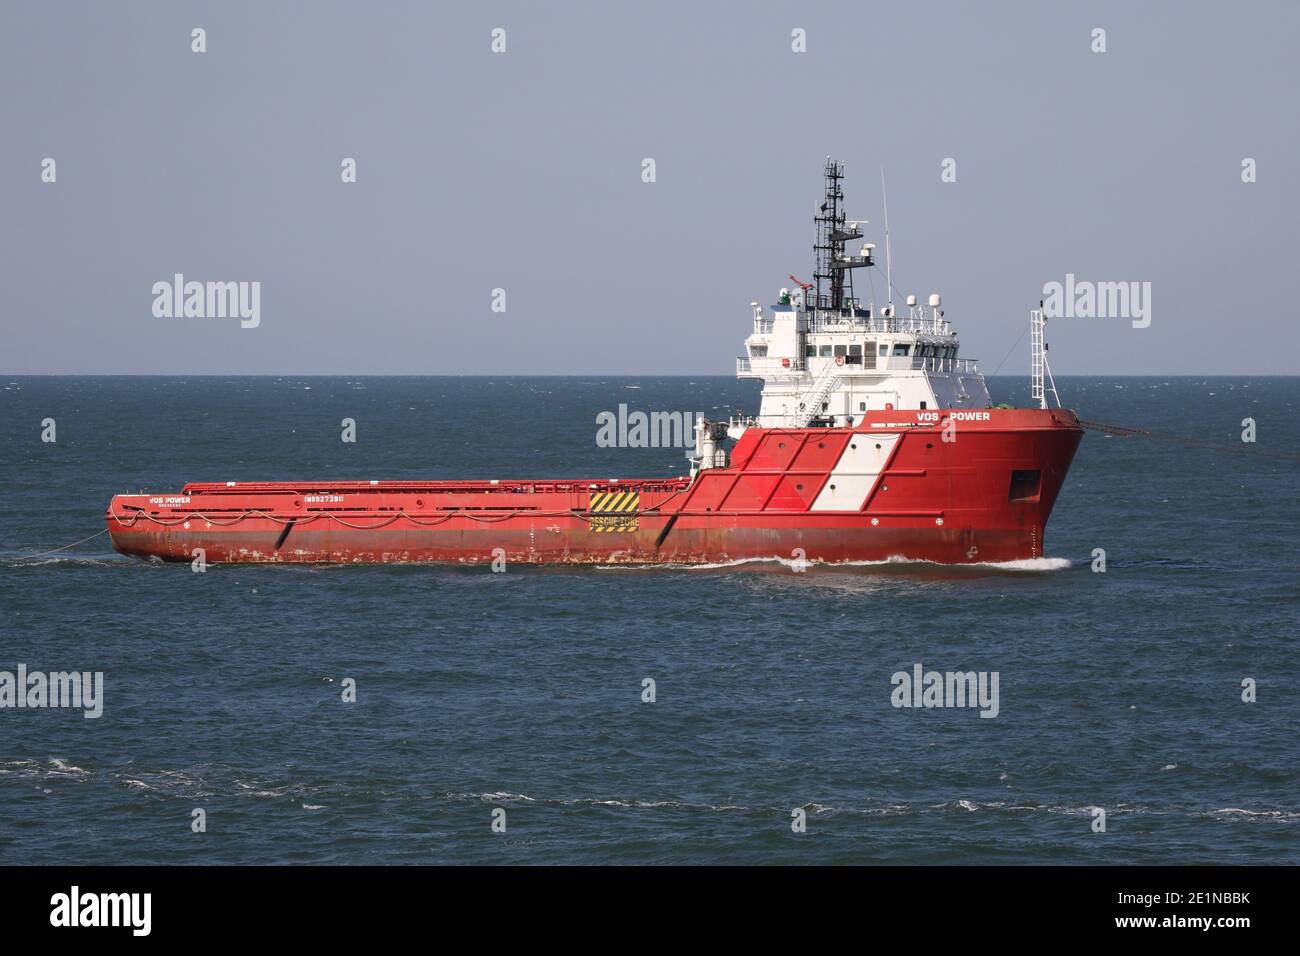 The offshore supplier VOS Power on September 18, 2020 on its last trip to the scraper. Stock Photo